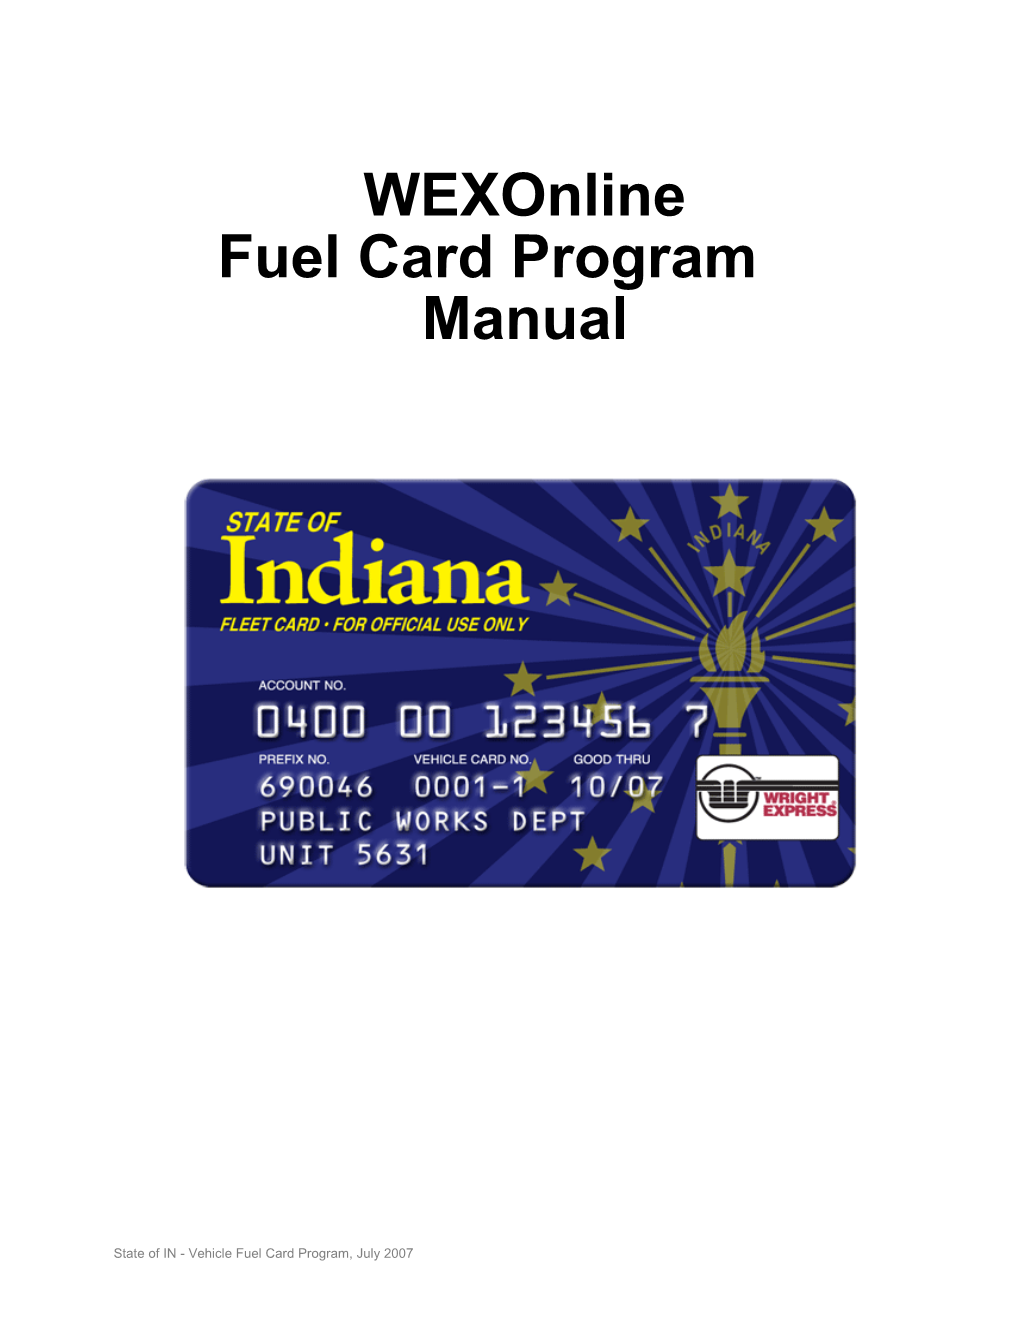 Wexonlinehome Page ( from Here You Can Navigate to All the Services Available for Example